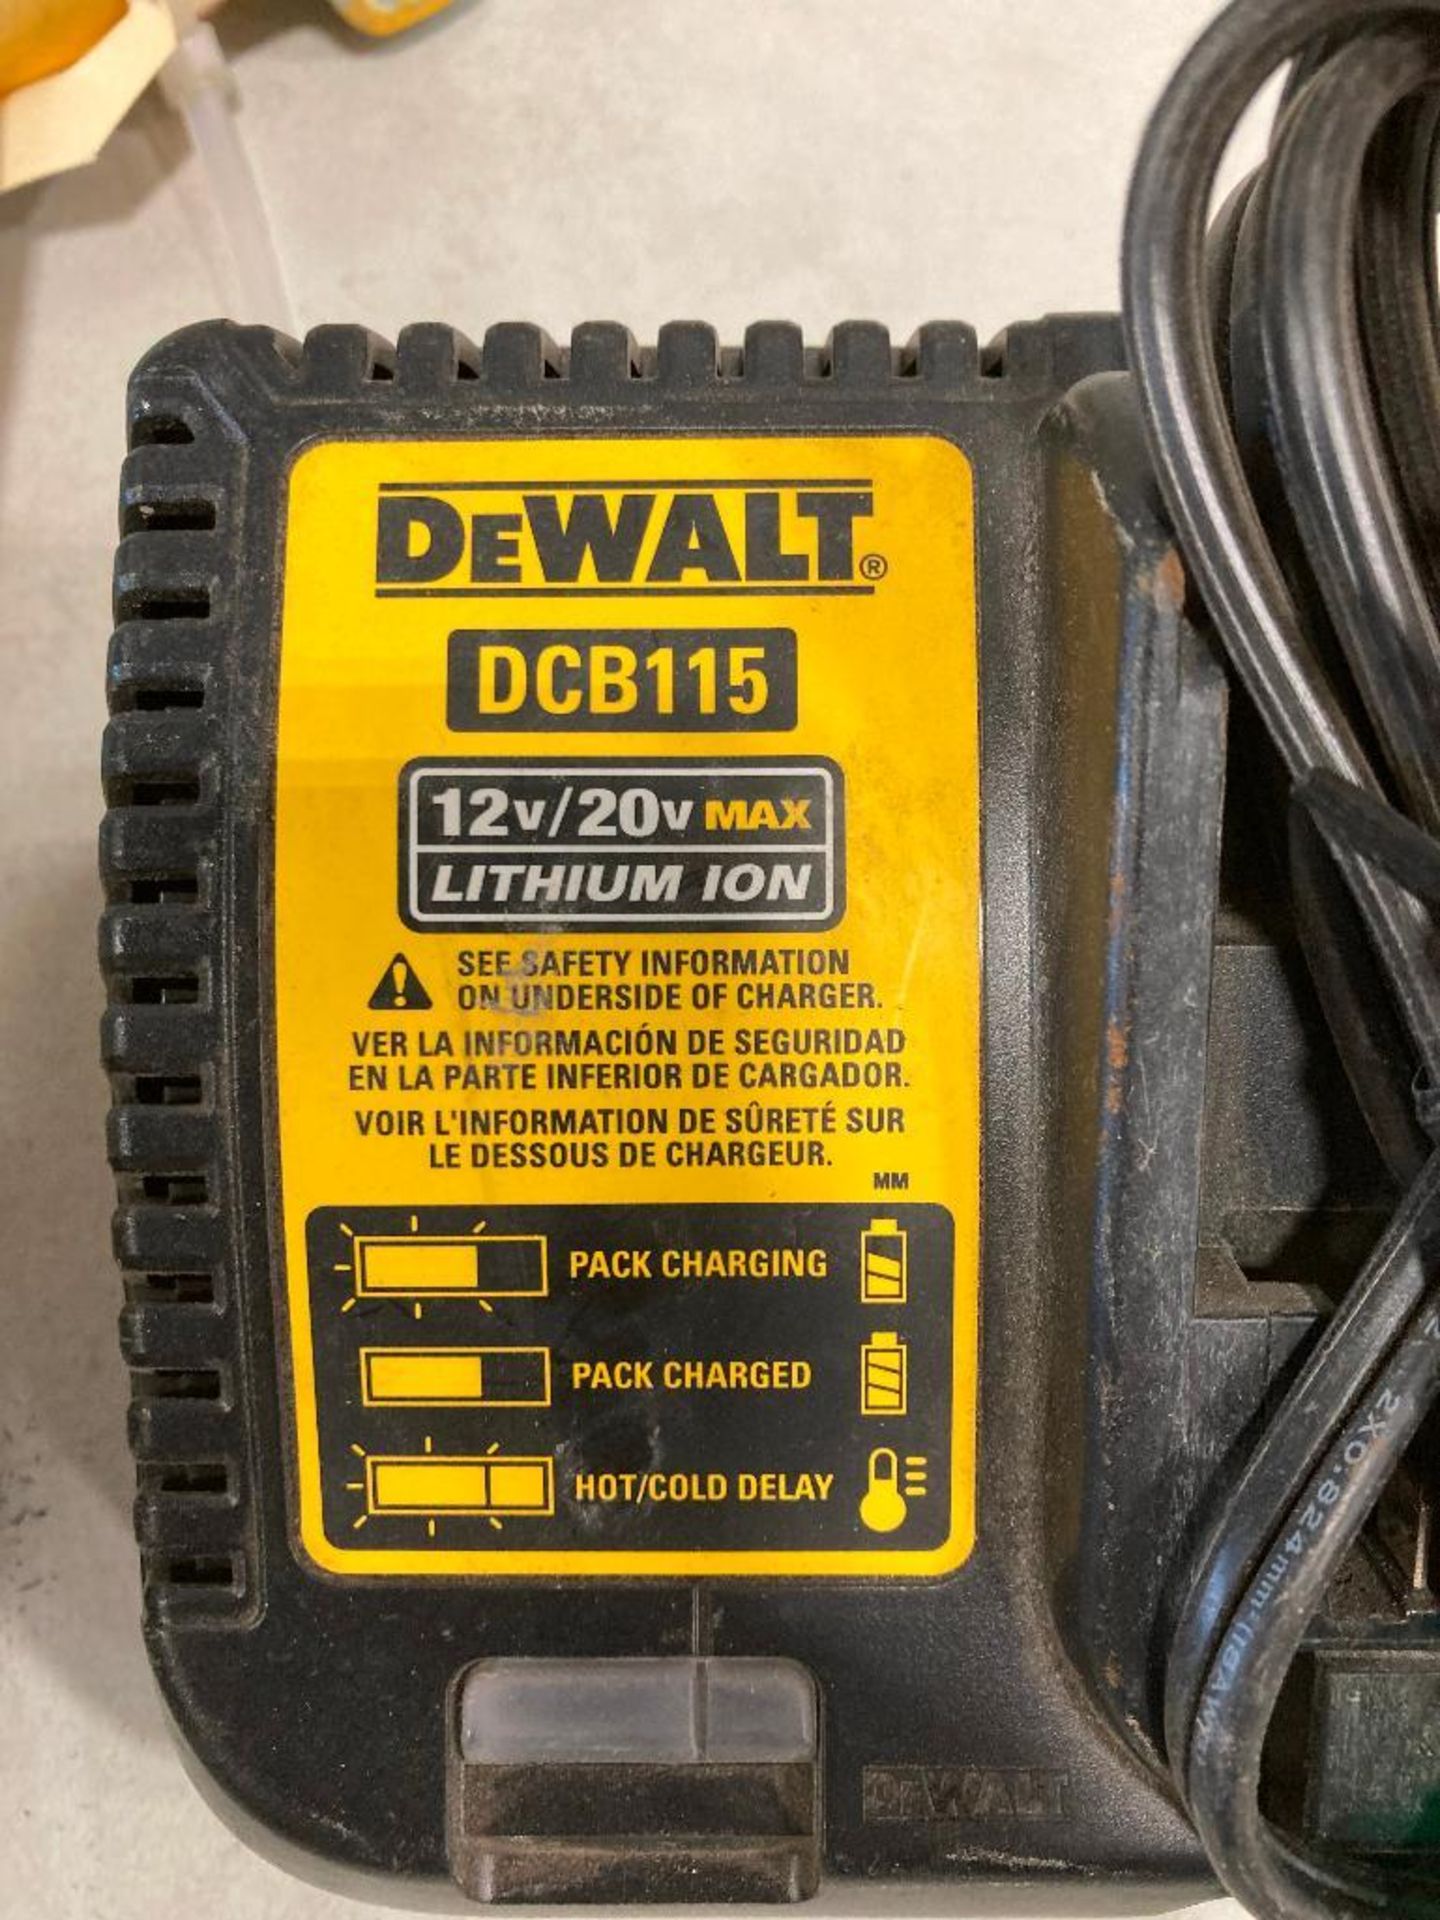 DeWalt Reciprocating Saw with Battery Charger - Image 3 of 4